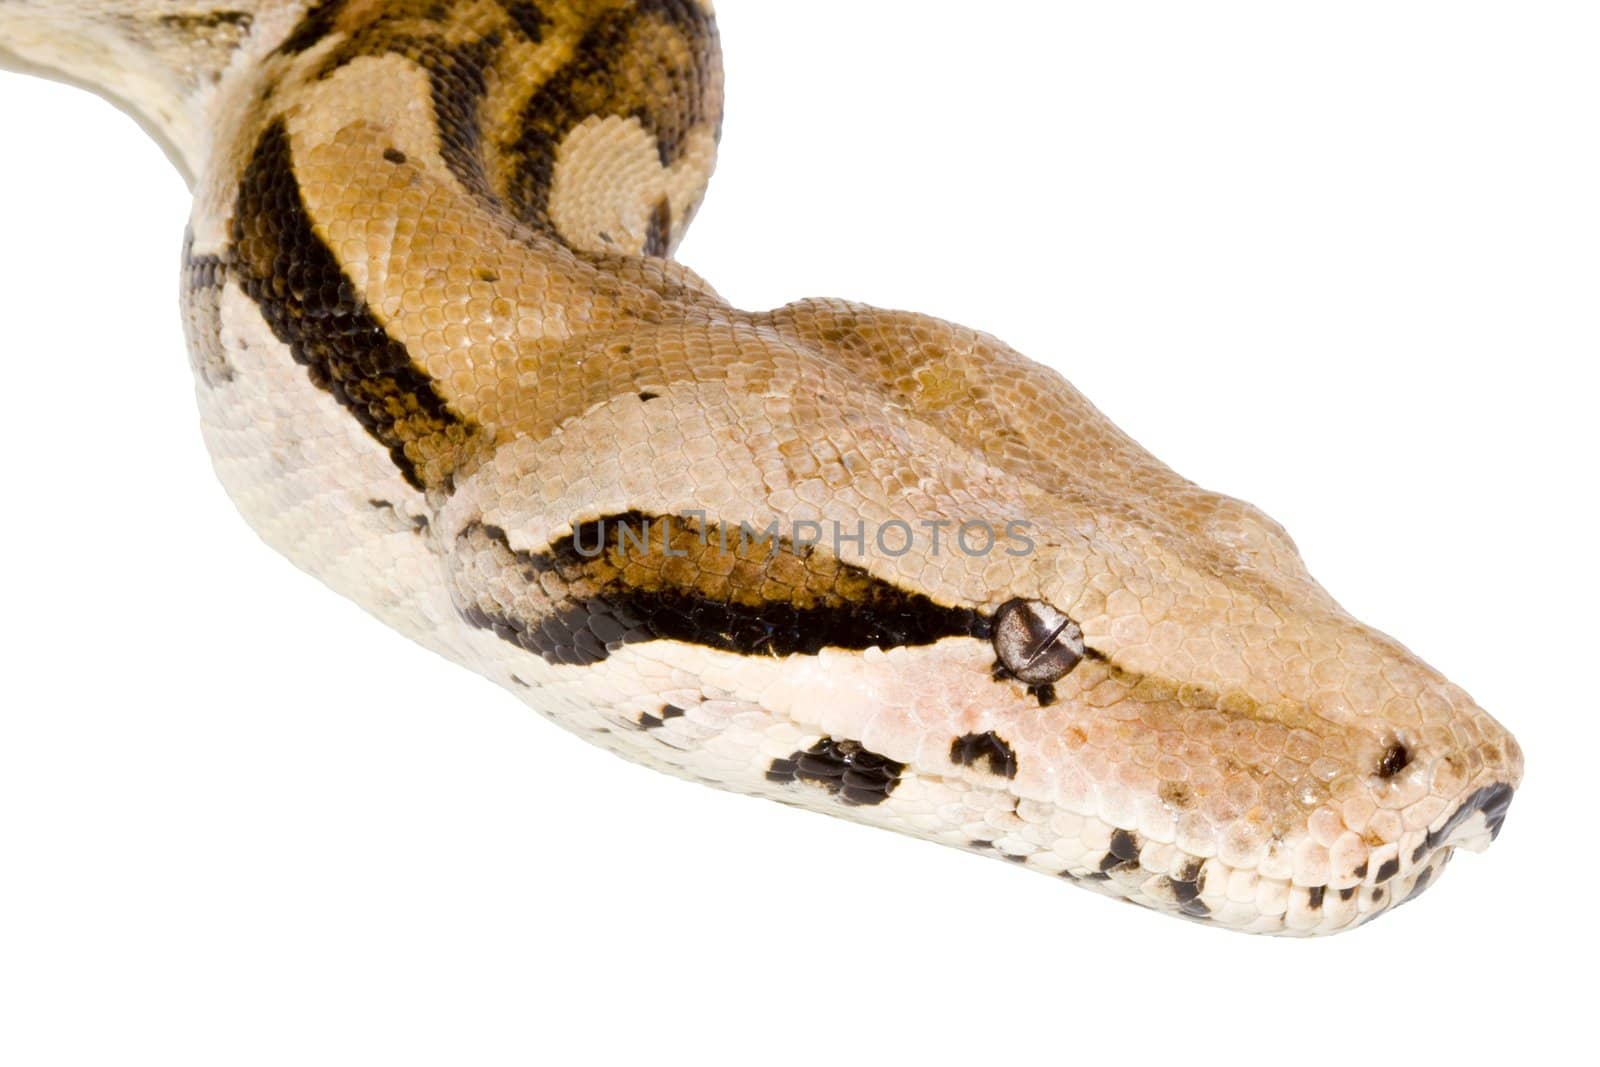 Head of a large adult Boa Constrictor  - detail